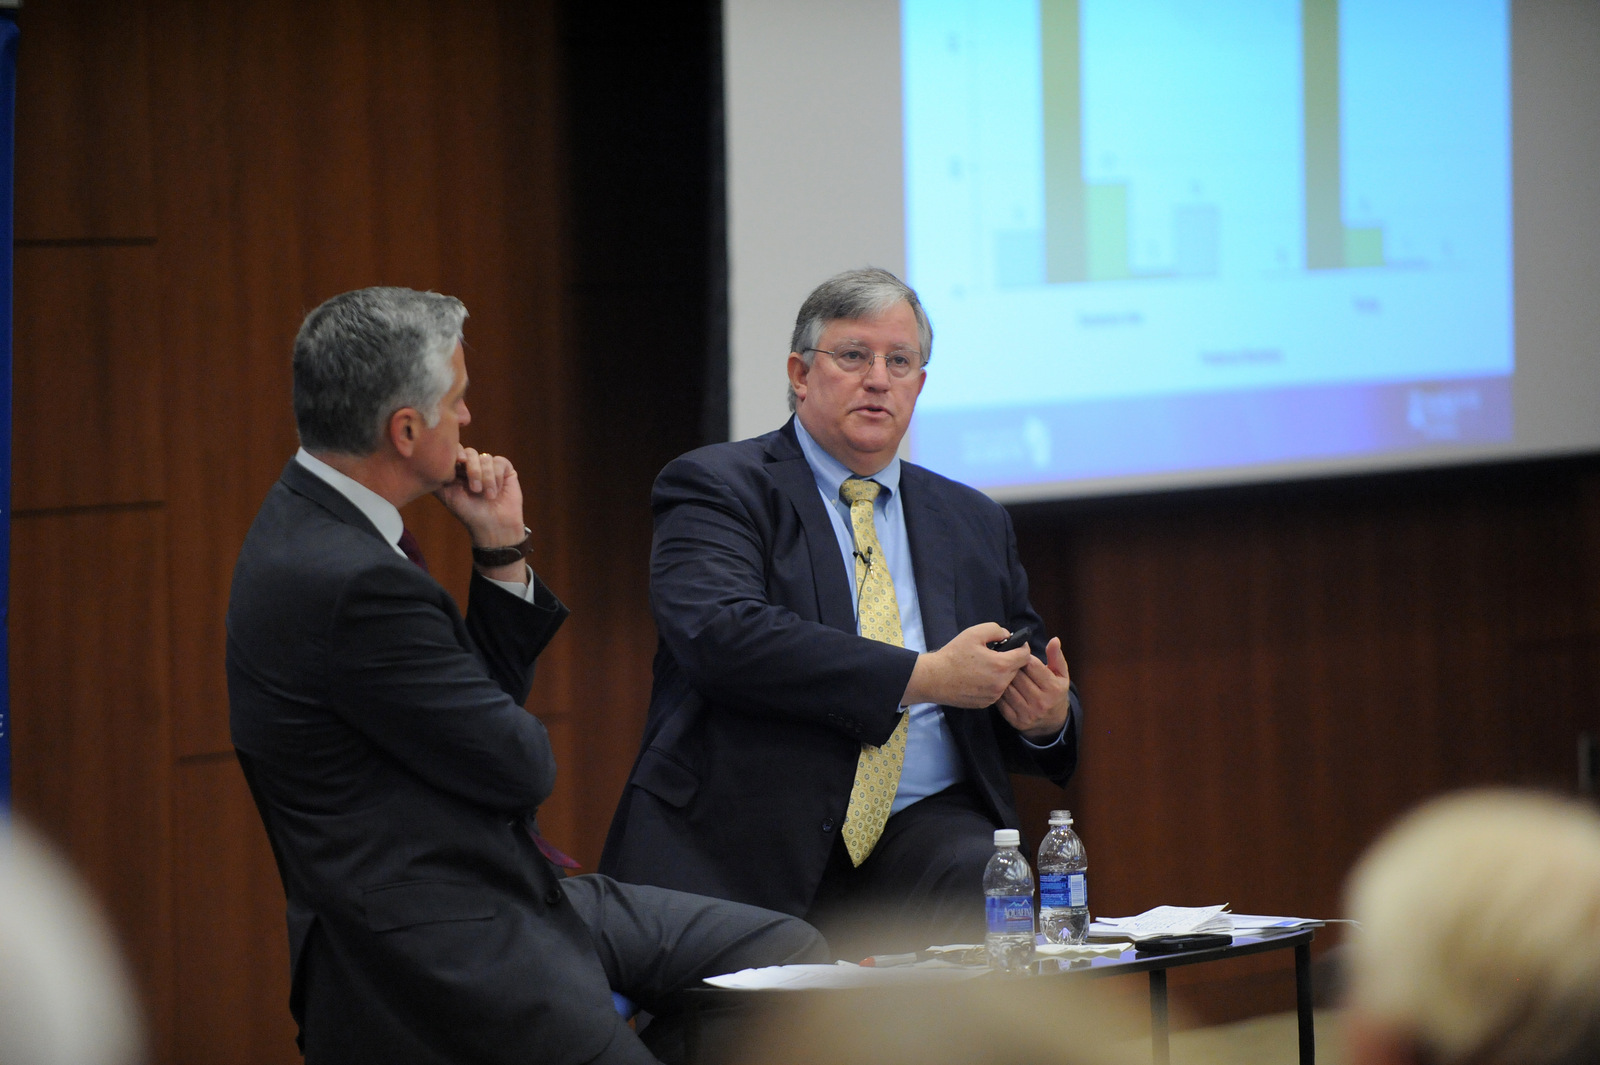 Charles Franklin discusses the results of a Marquette Law Poll with Mike Gousha in September 2019